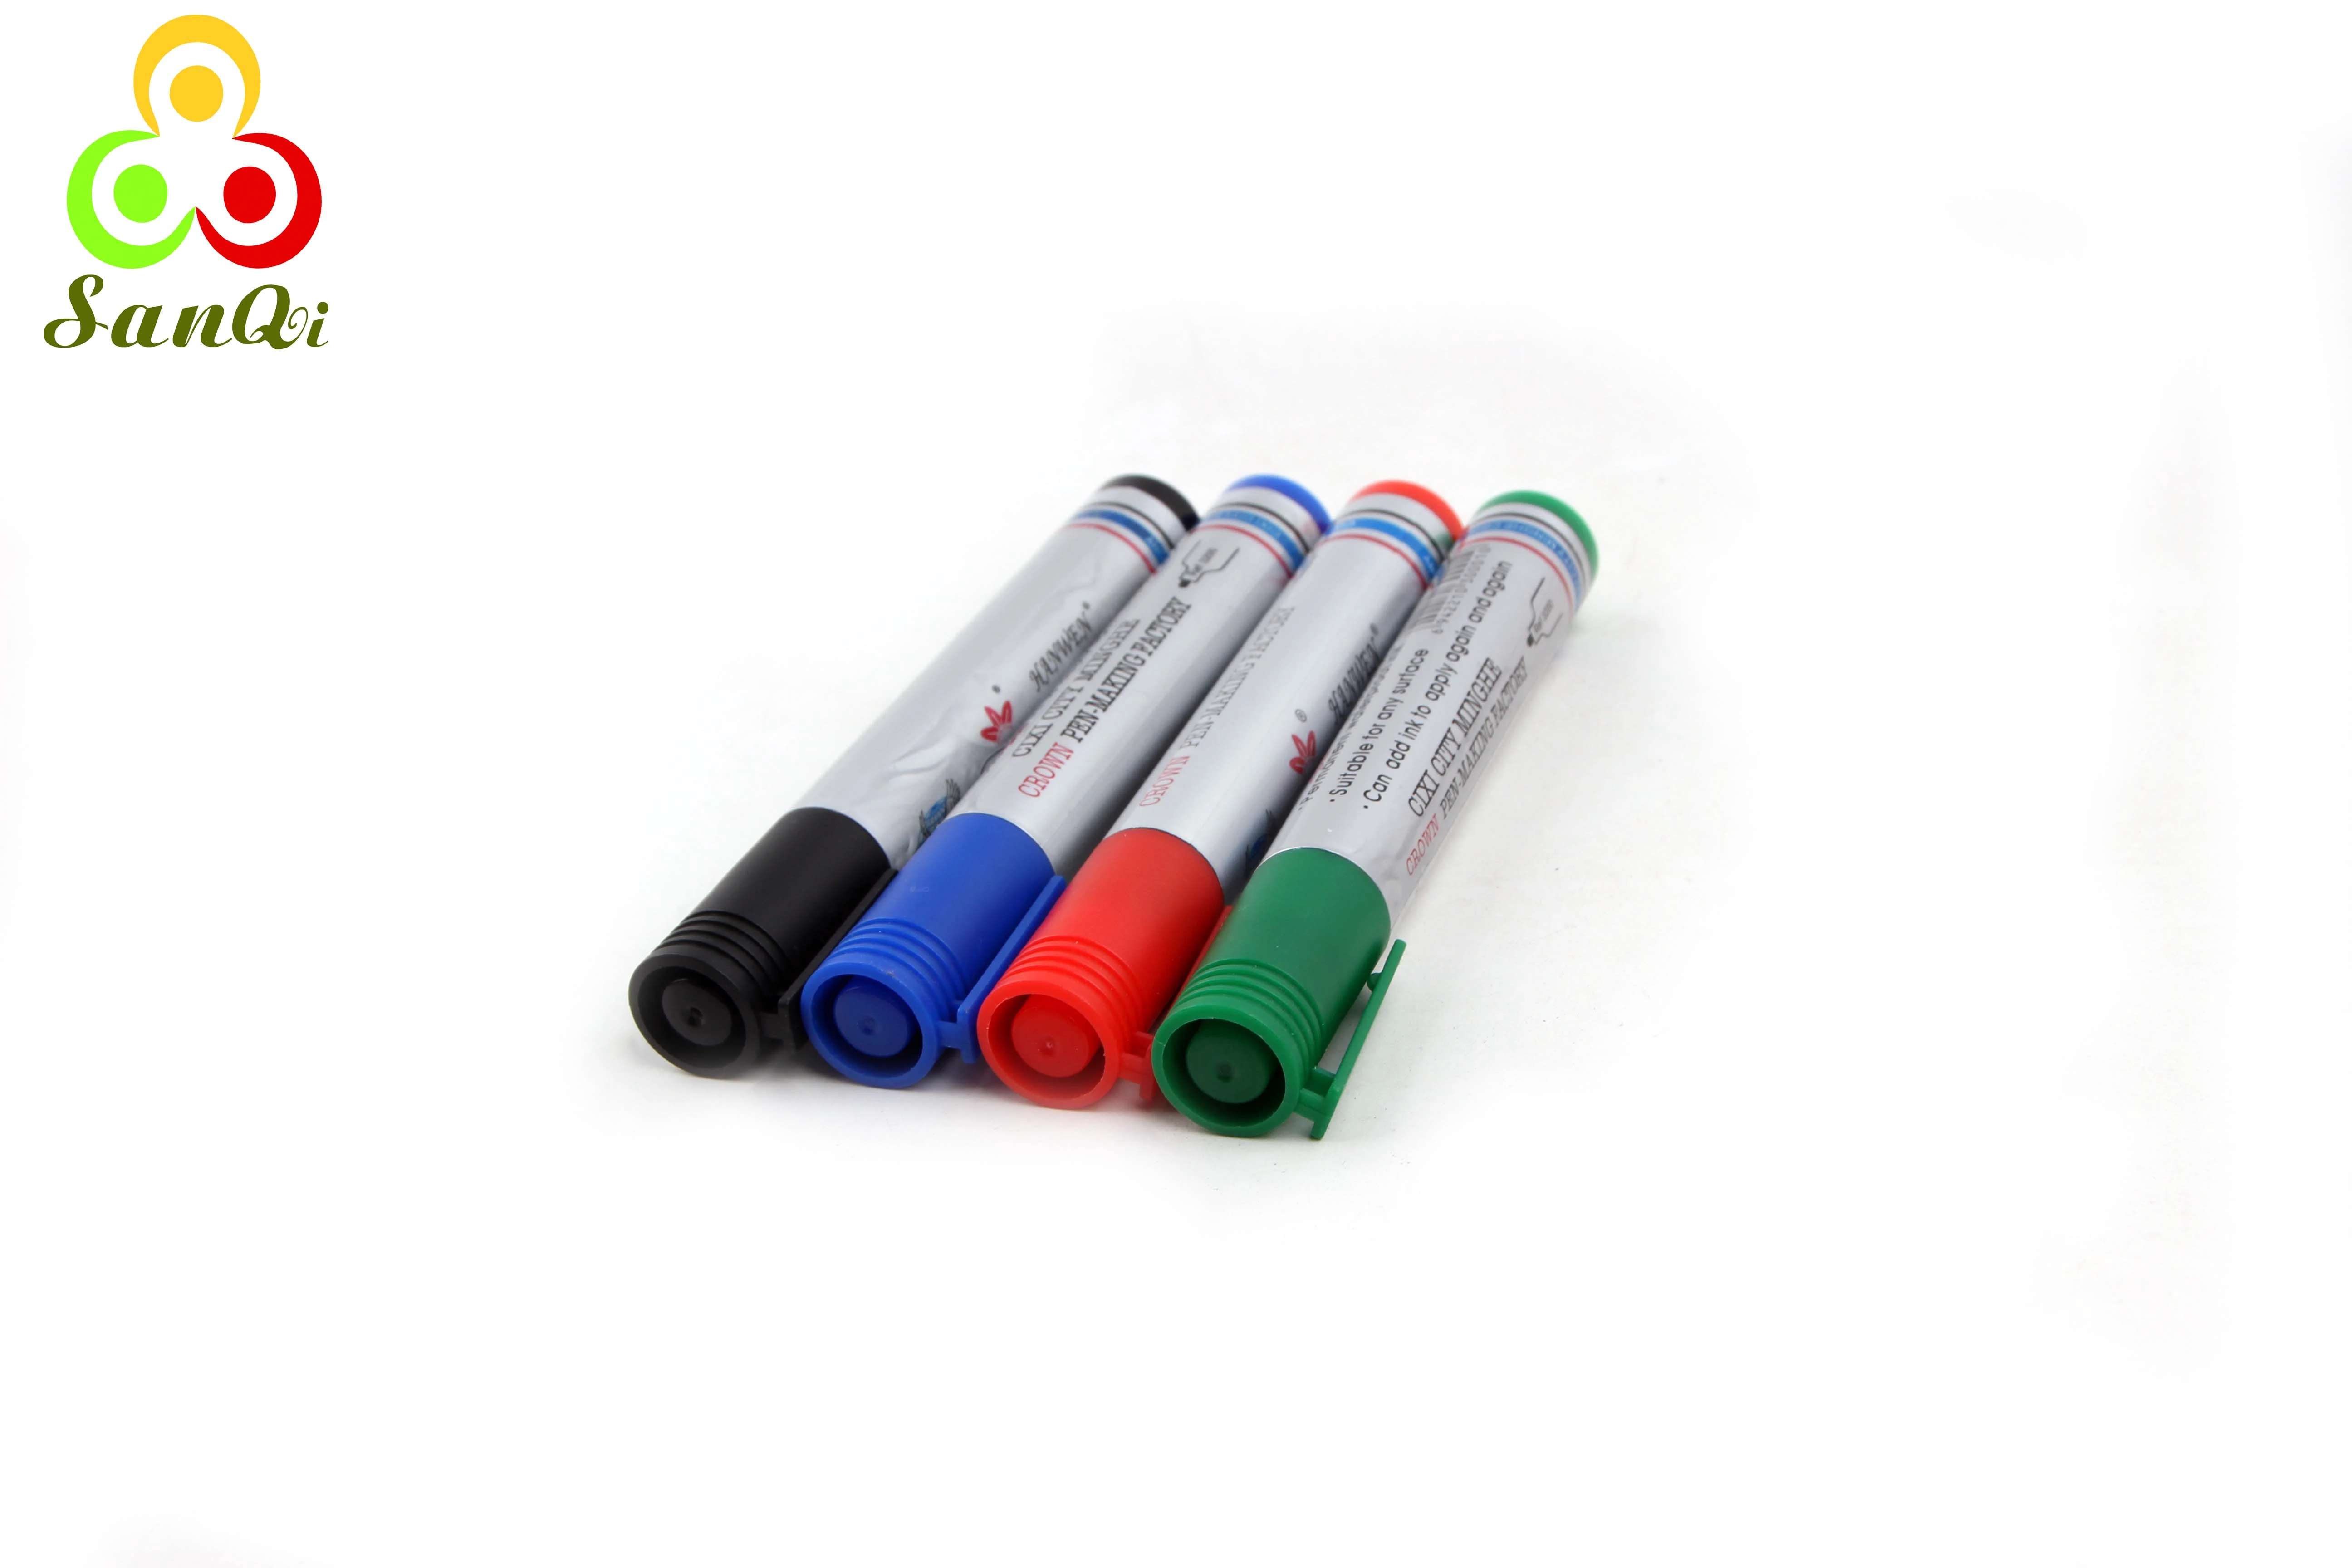 Africa Hot Selling Mark Pen, Cheap and good Quality Colors Water Markers Pens, Easy To Use